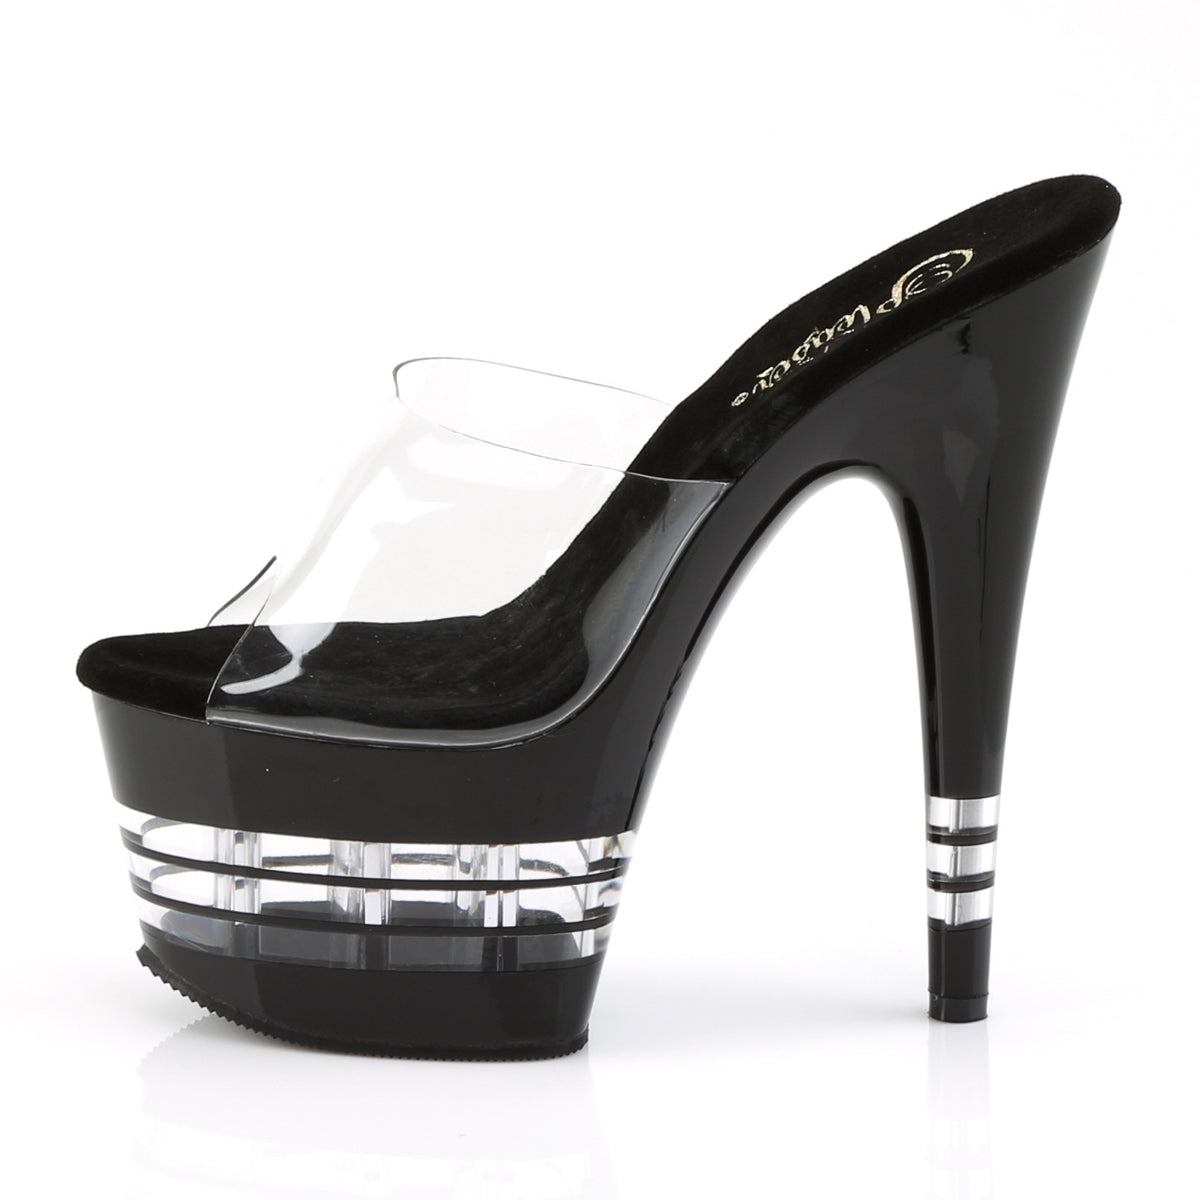 ADORE-701LN / C / B 7 "PLEASER FAST DELIVERY 24-48h 